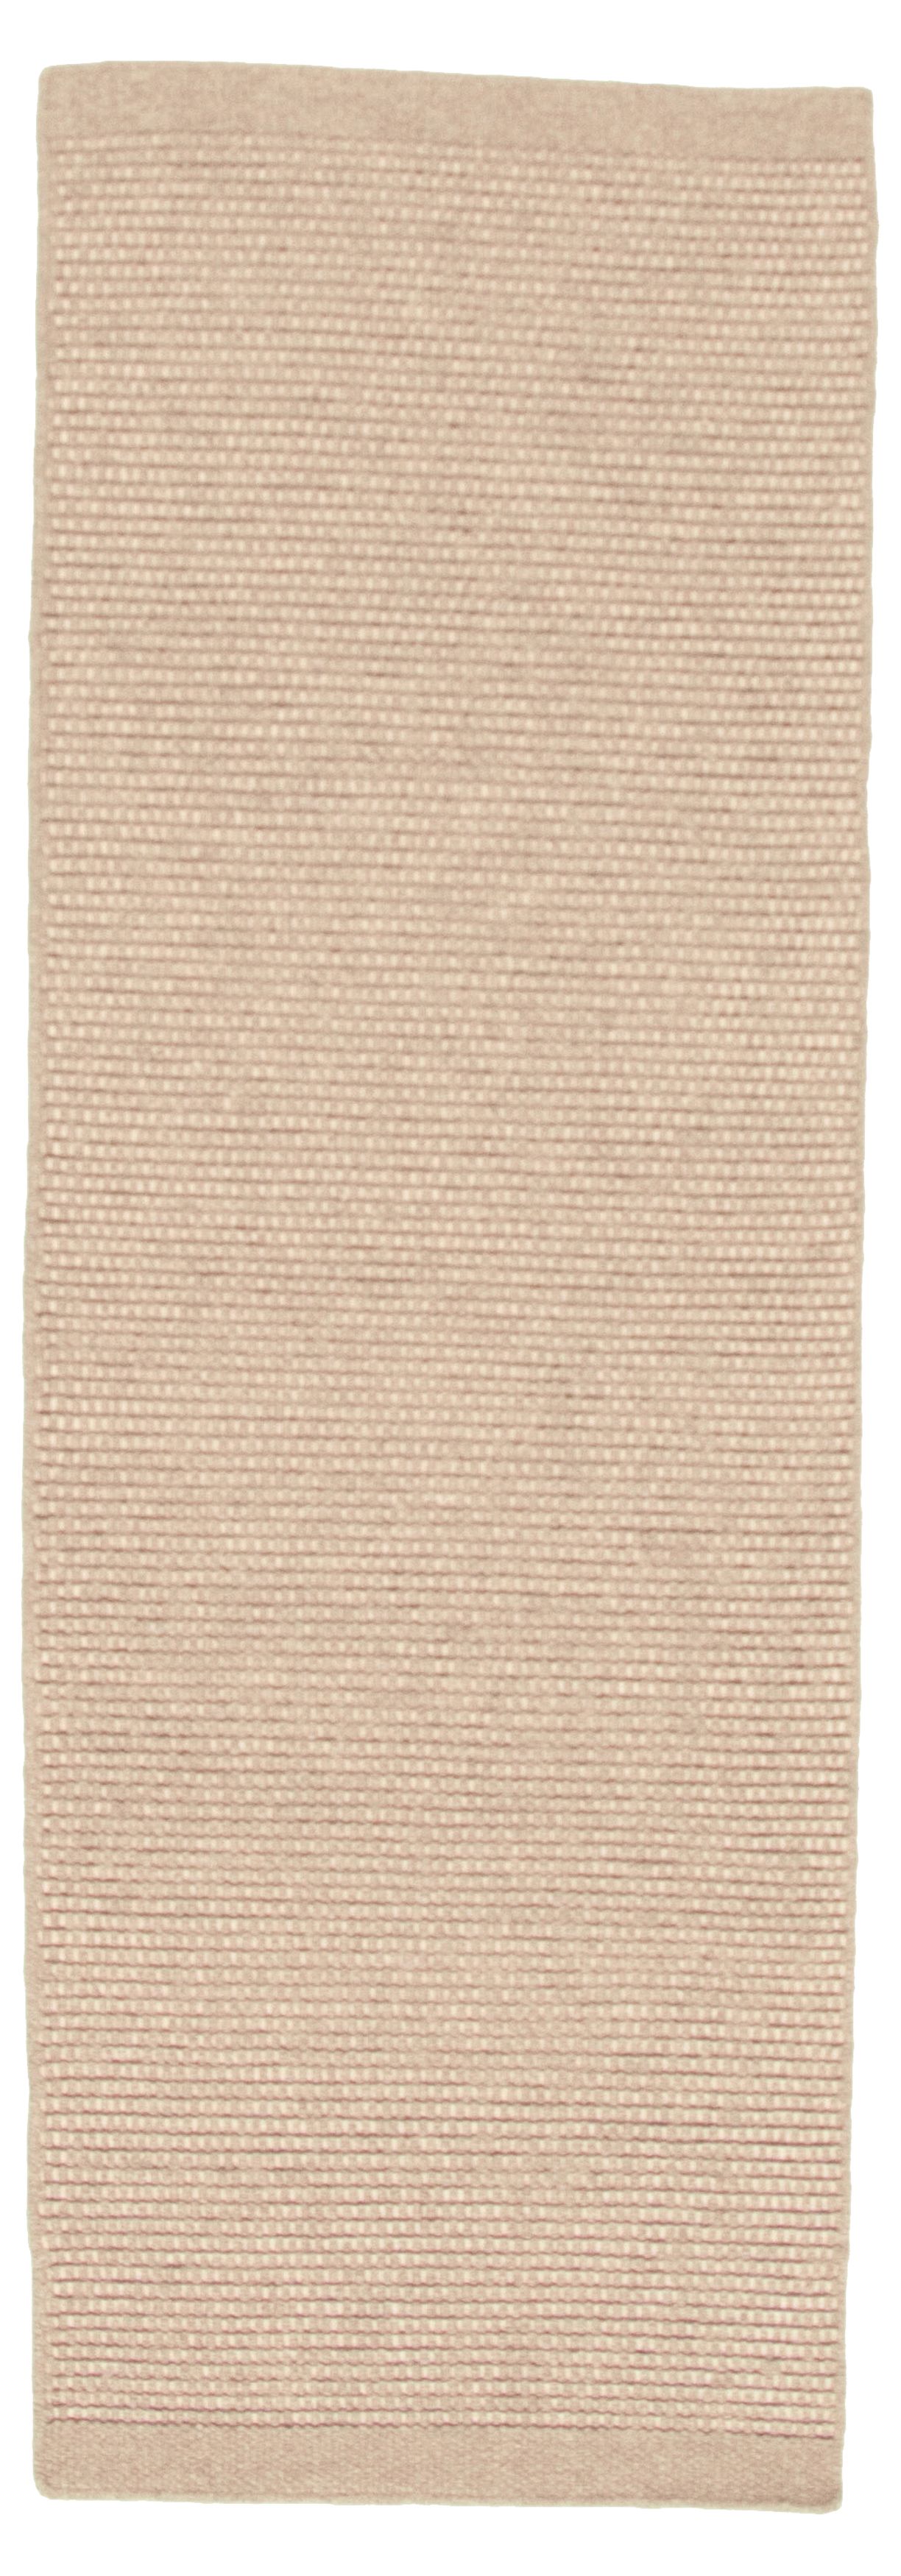 Hand loomed Bungalow  Tan Wool Dhurrie 2'8" x 8'1" Size: 2'8" x 8'1"  